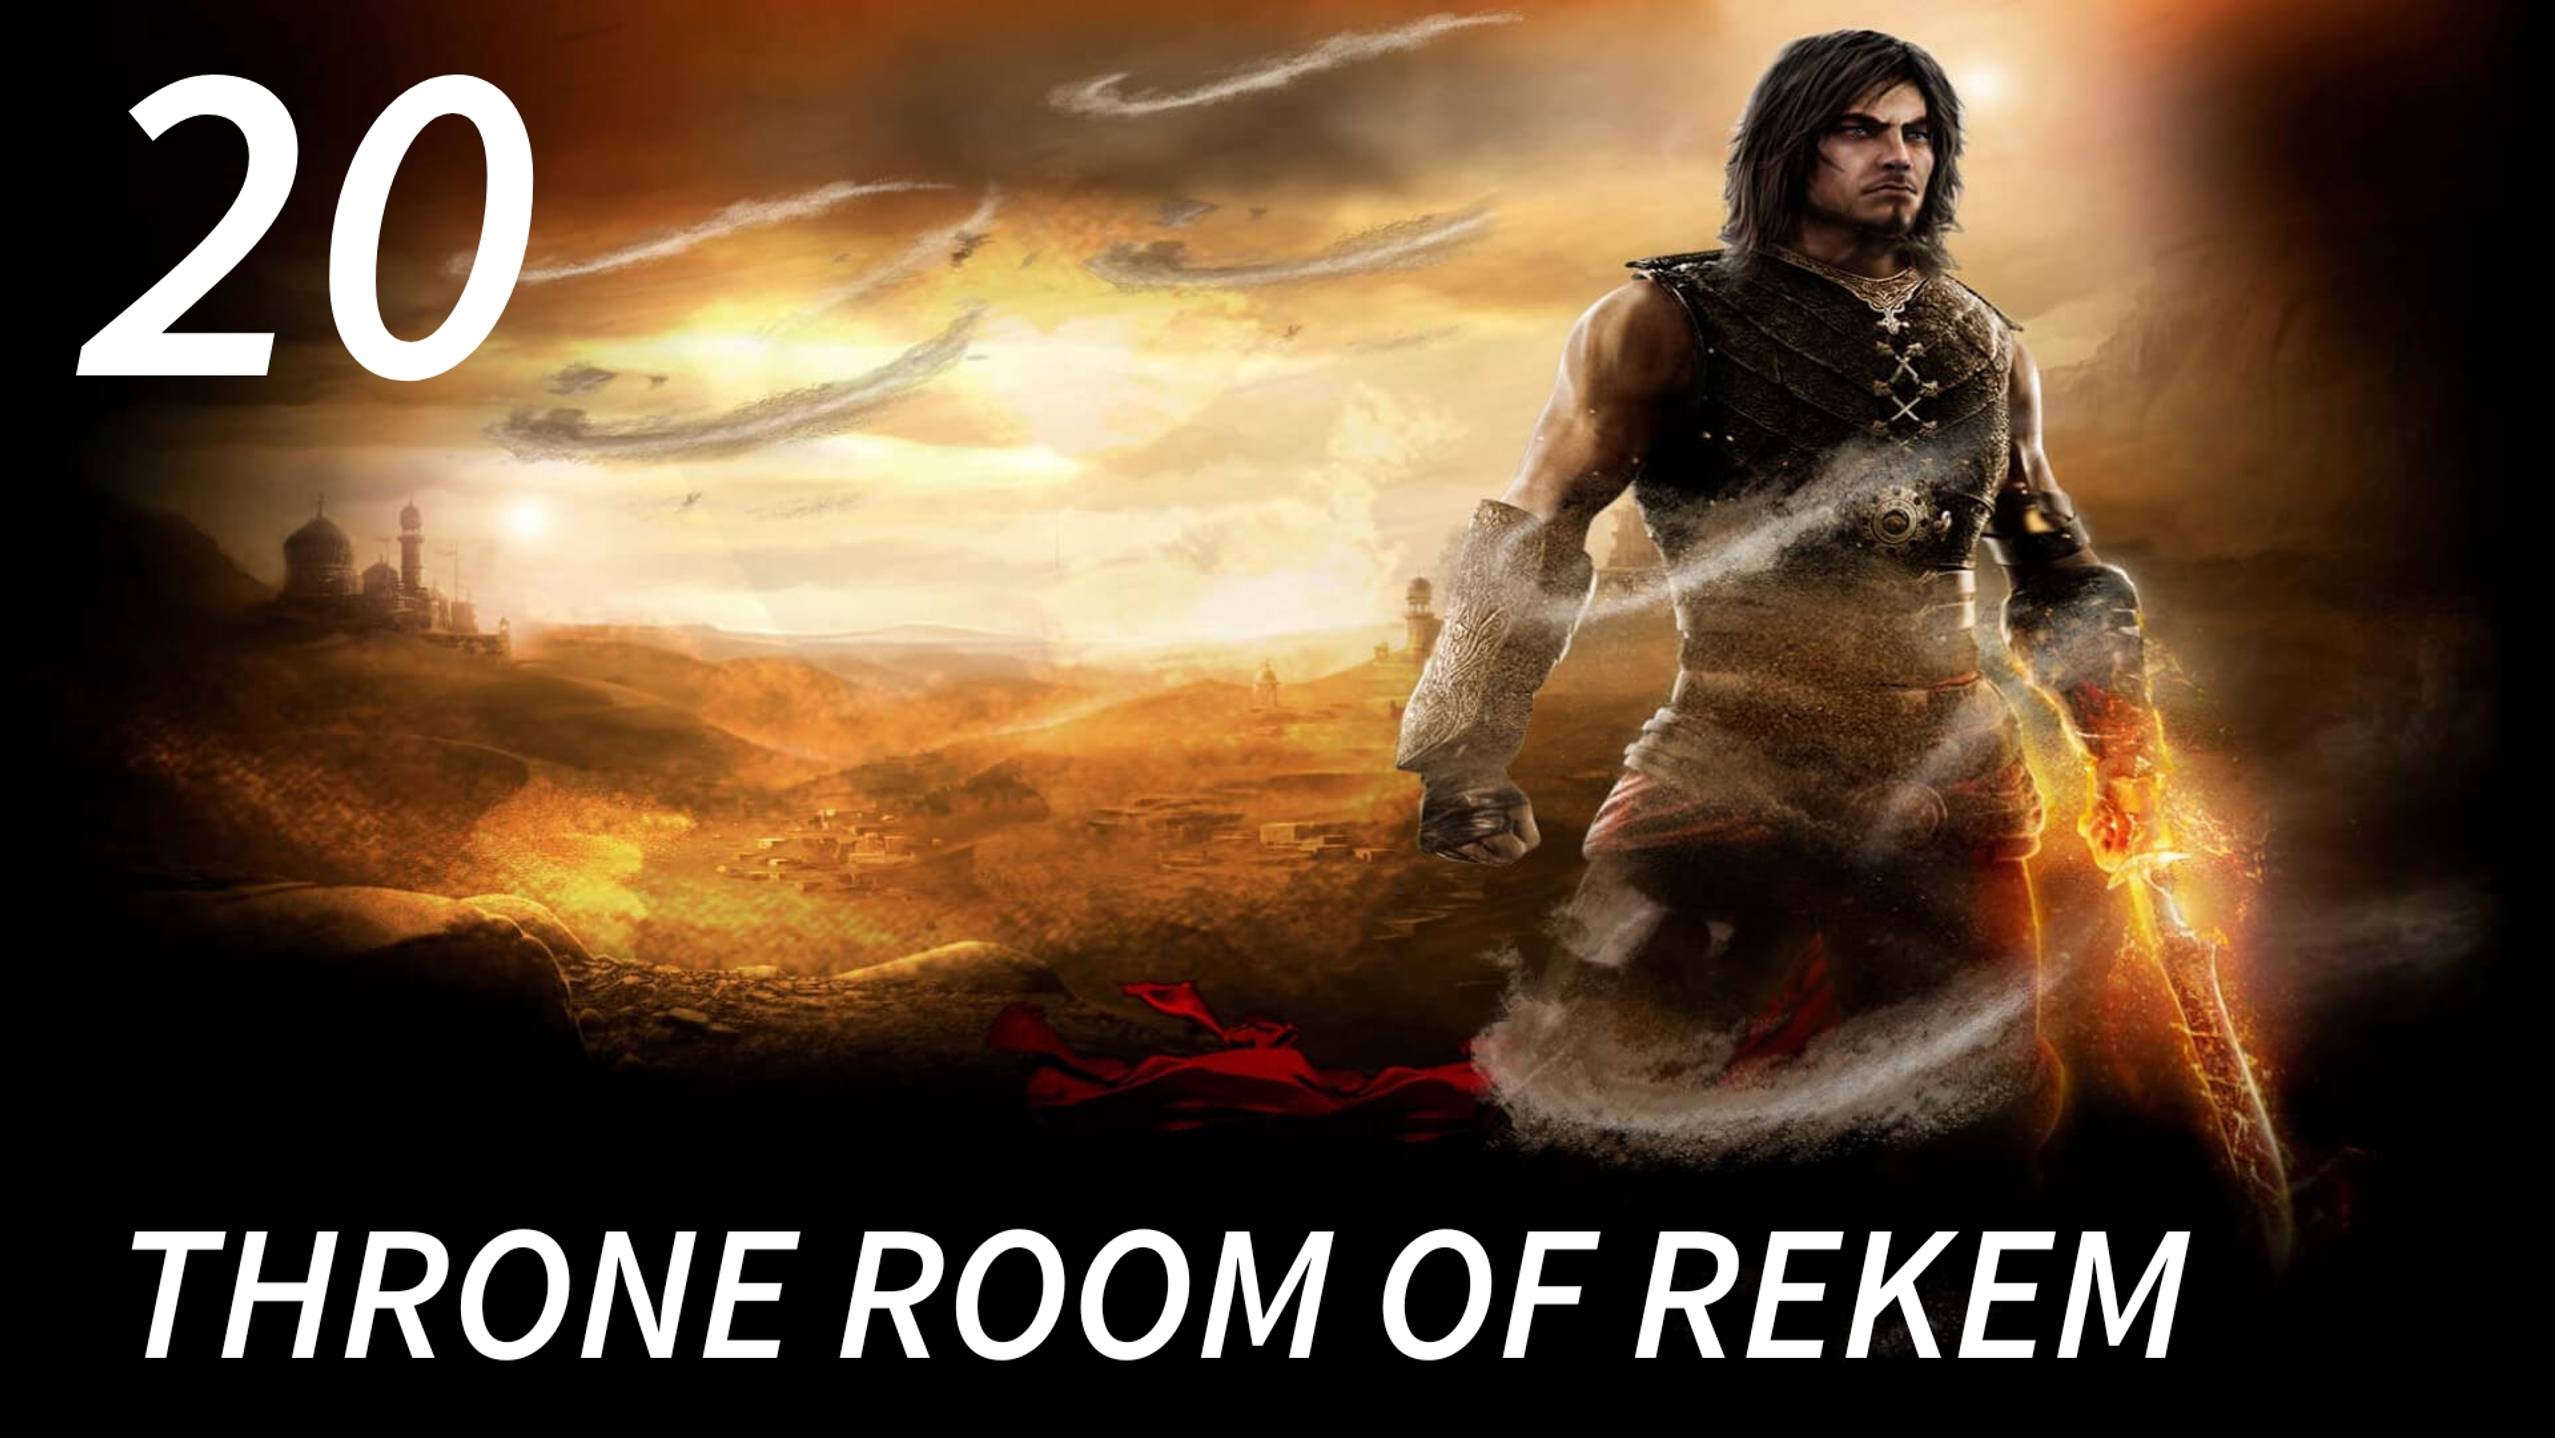 Prince of Persia: The Forgotten Sands / Throne Room of Rekem